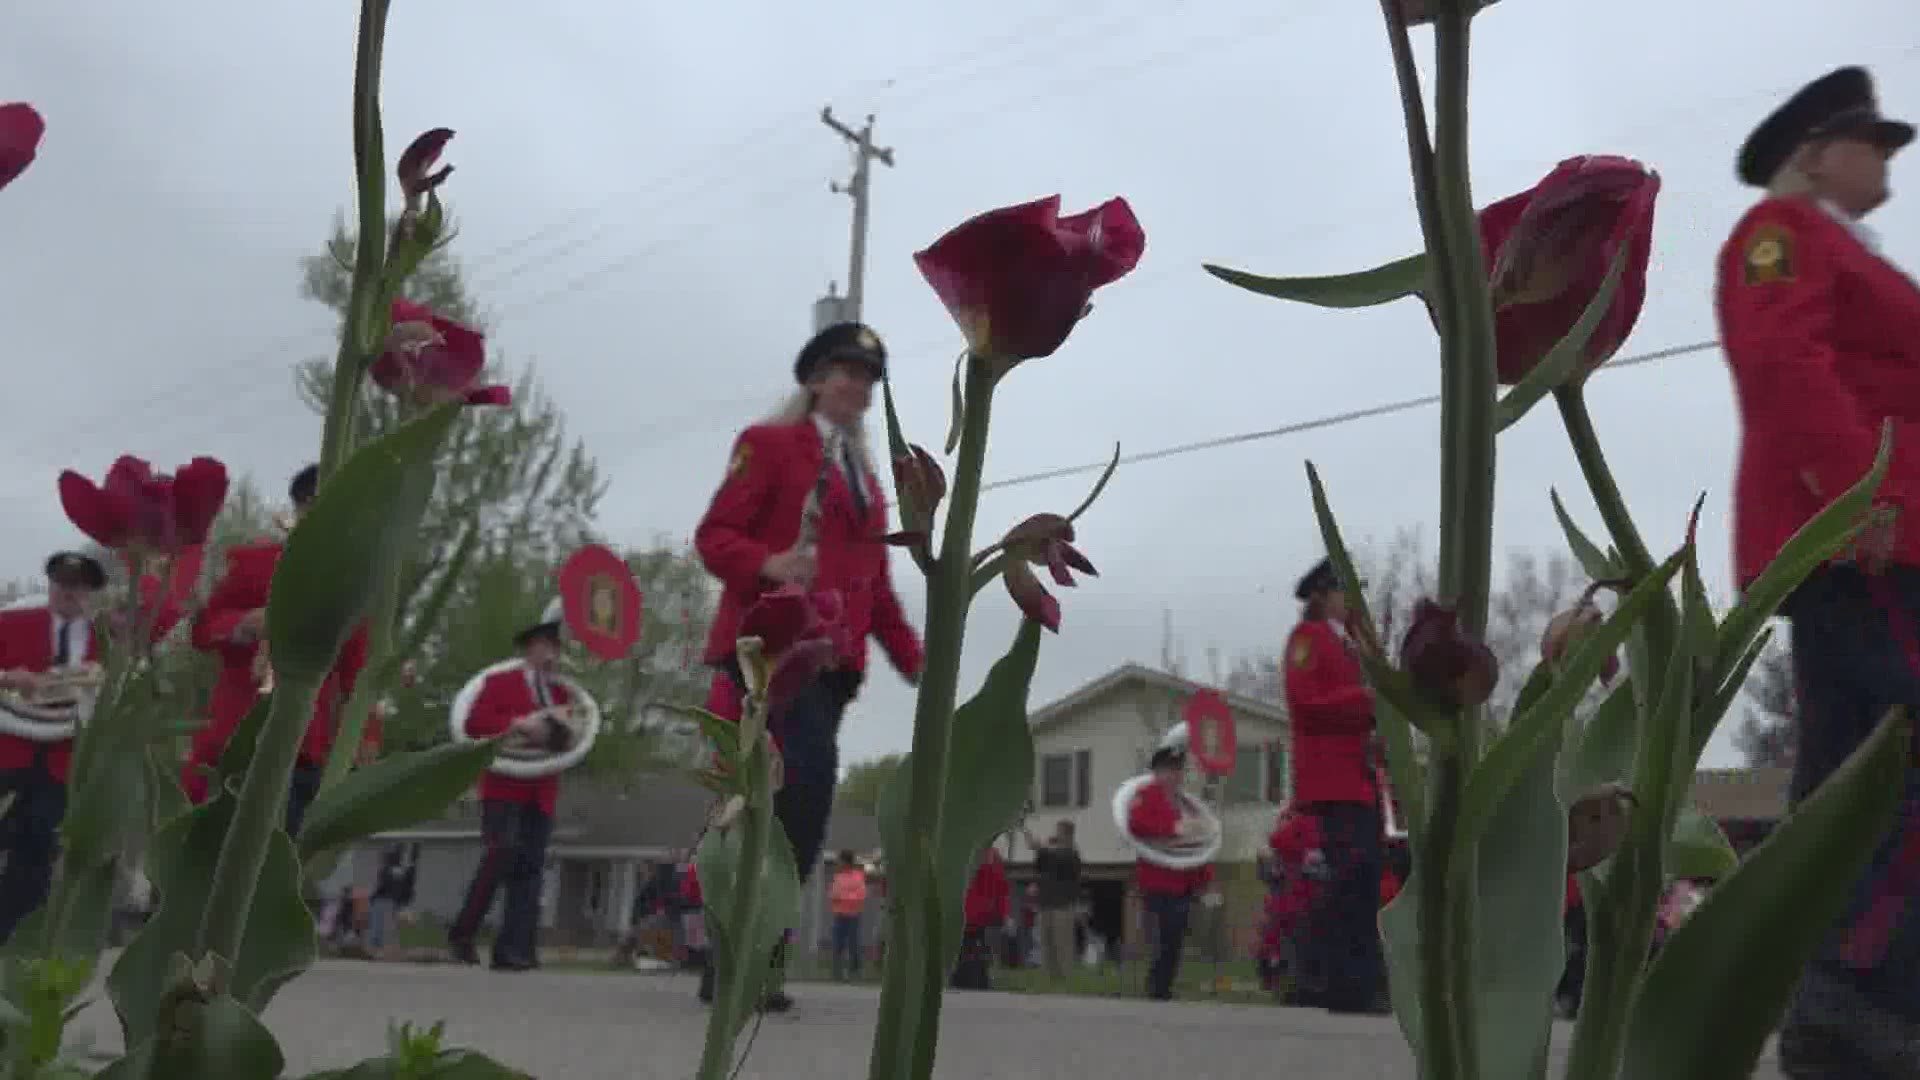 Tulip Time has reached 80% of its fundraising goal to help the festival run in future years.